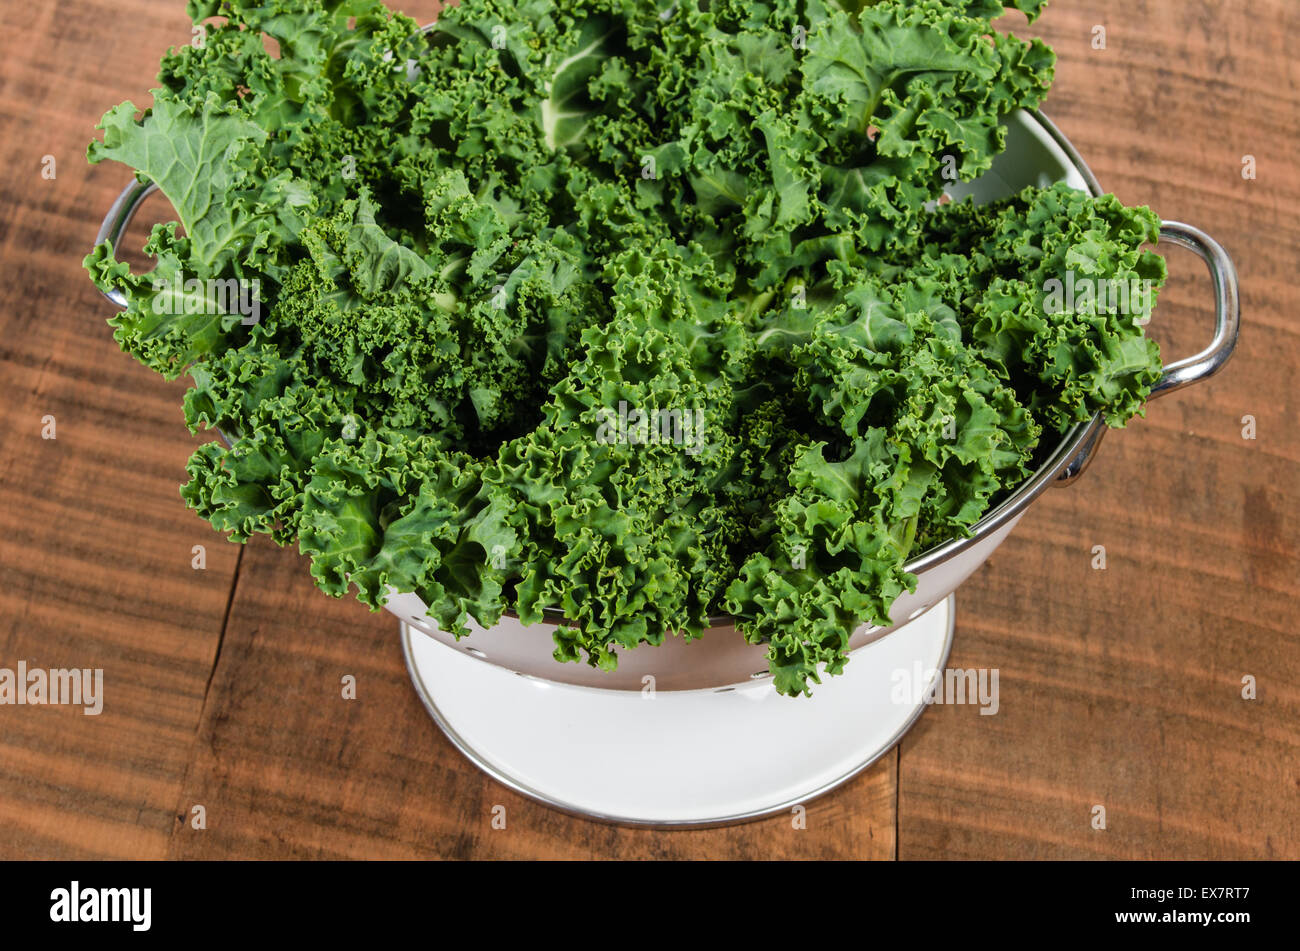 Colandar of green curly kale leaves Stock Photo